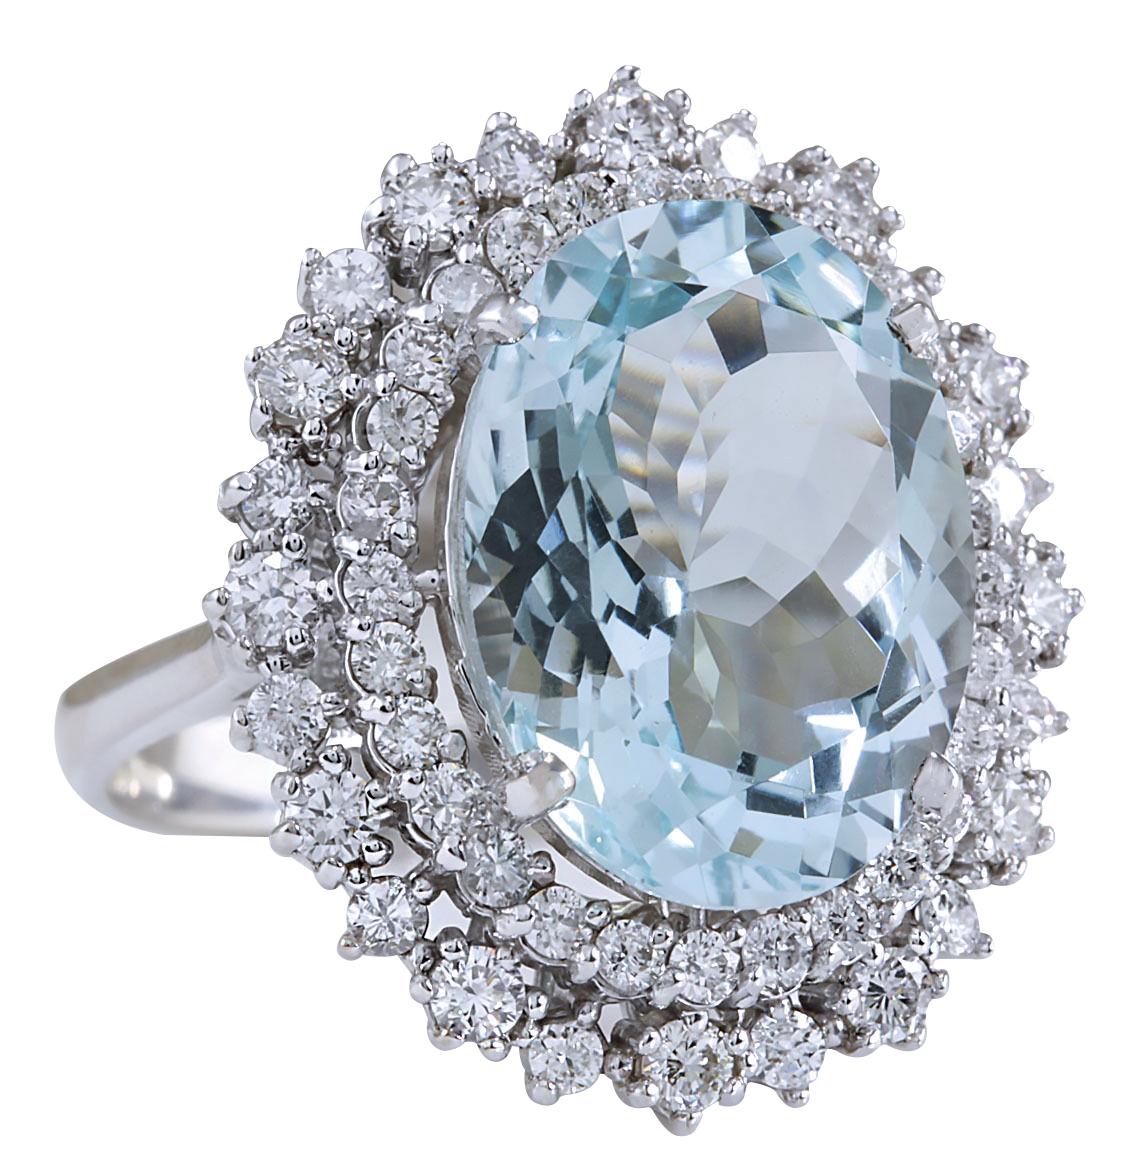 Introducing our breathtaking 9.68 Carat Aquamarine 14K White Gold Diamond Ring, a masterpiece of elegance and sophistication. Crafted from genuine 14K White Gold and stamped for authenticity, this ring weighs 9.0 grams, ensuring both quality and